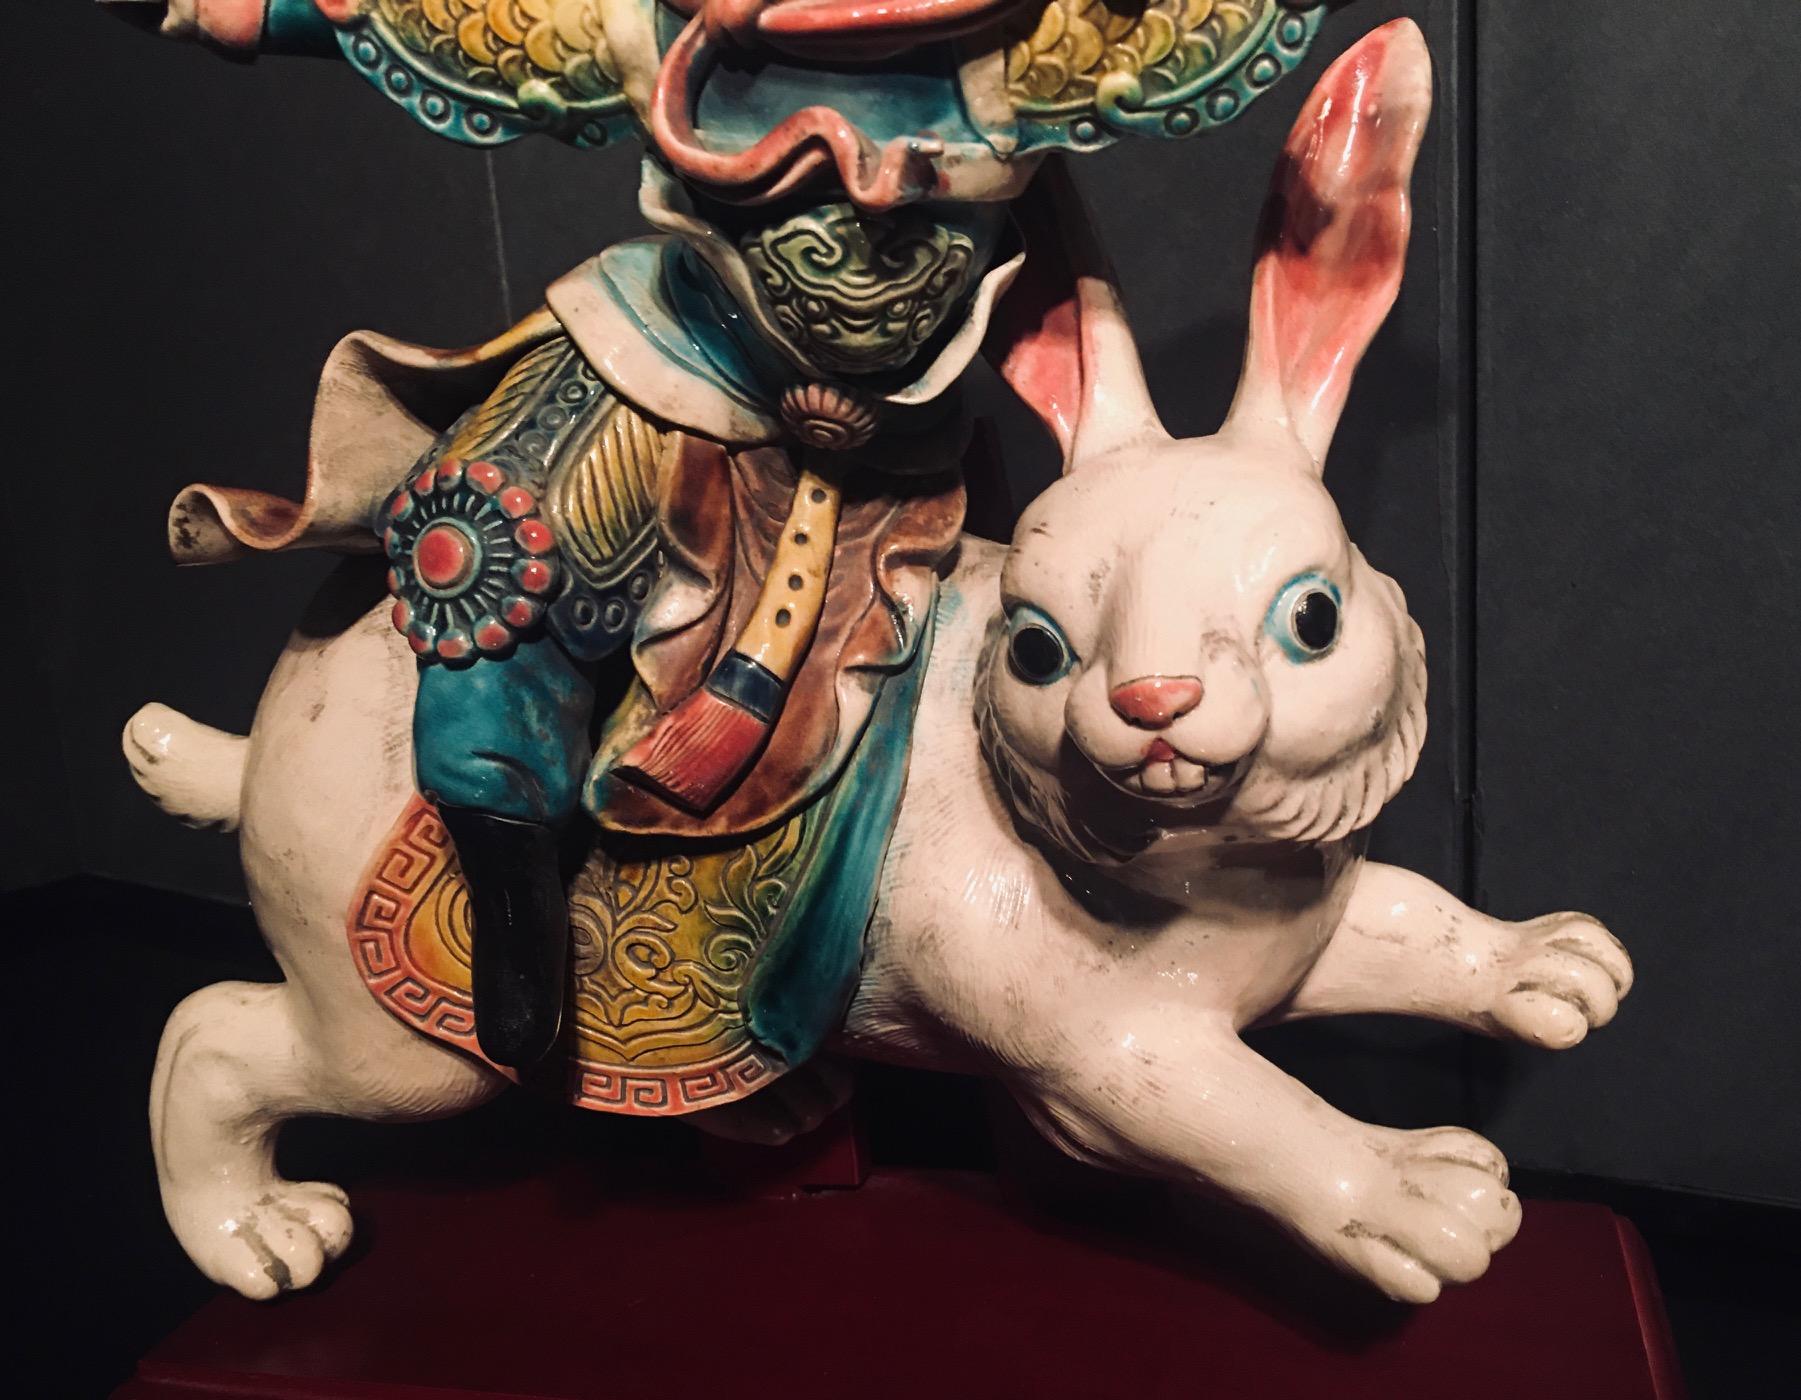 Chinese glazed porcelain roof tile of a warrior riding a rabbit. The manufacture of glazed tiles was standardized in the Ming dynasty and during the Qing dynasty, glazed tiles became ever more popular for top-tier buildings, including palace halls